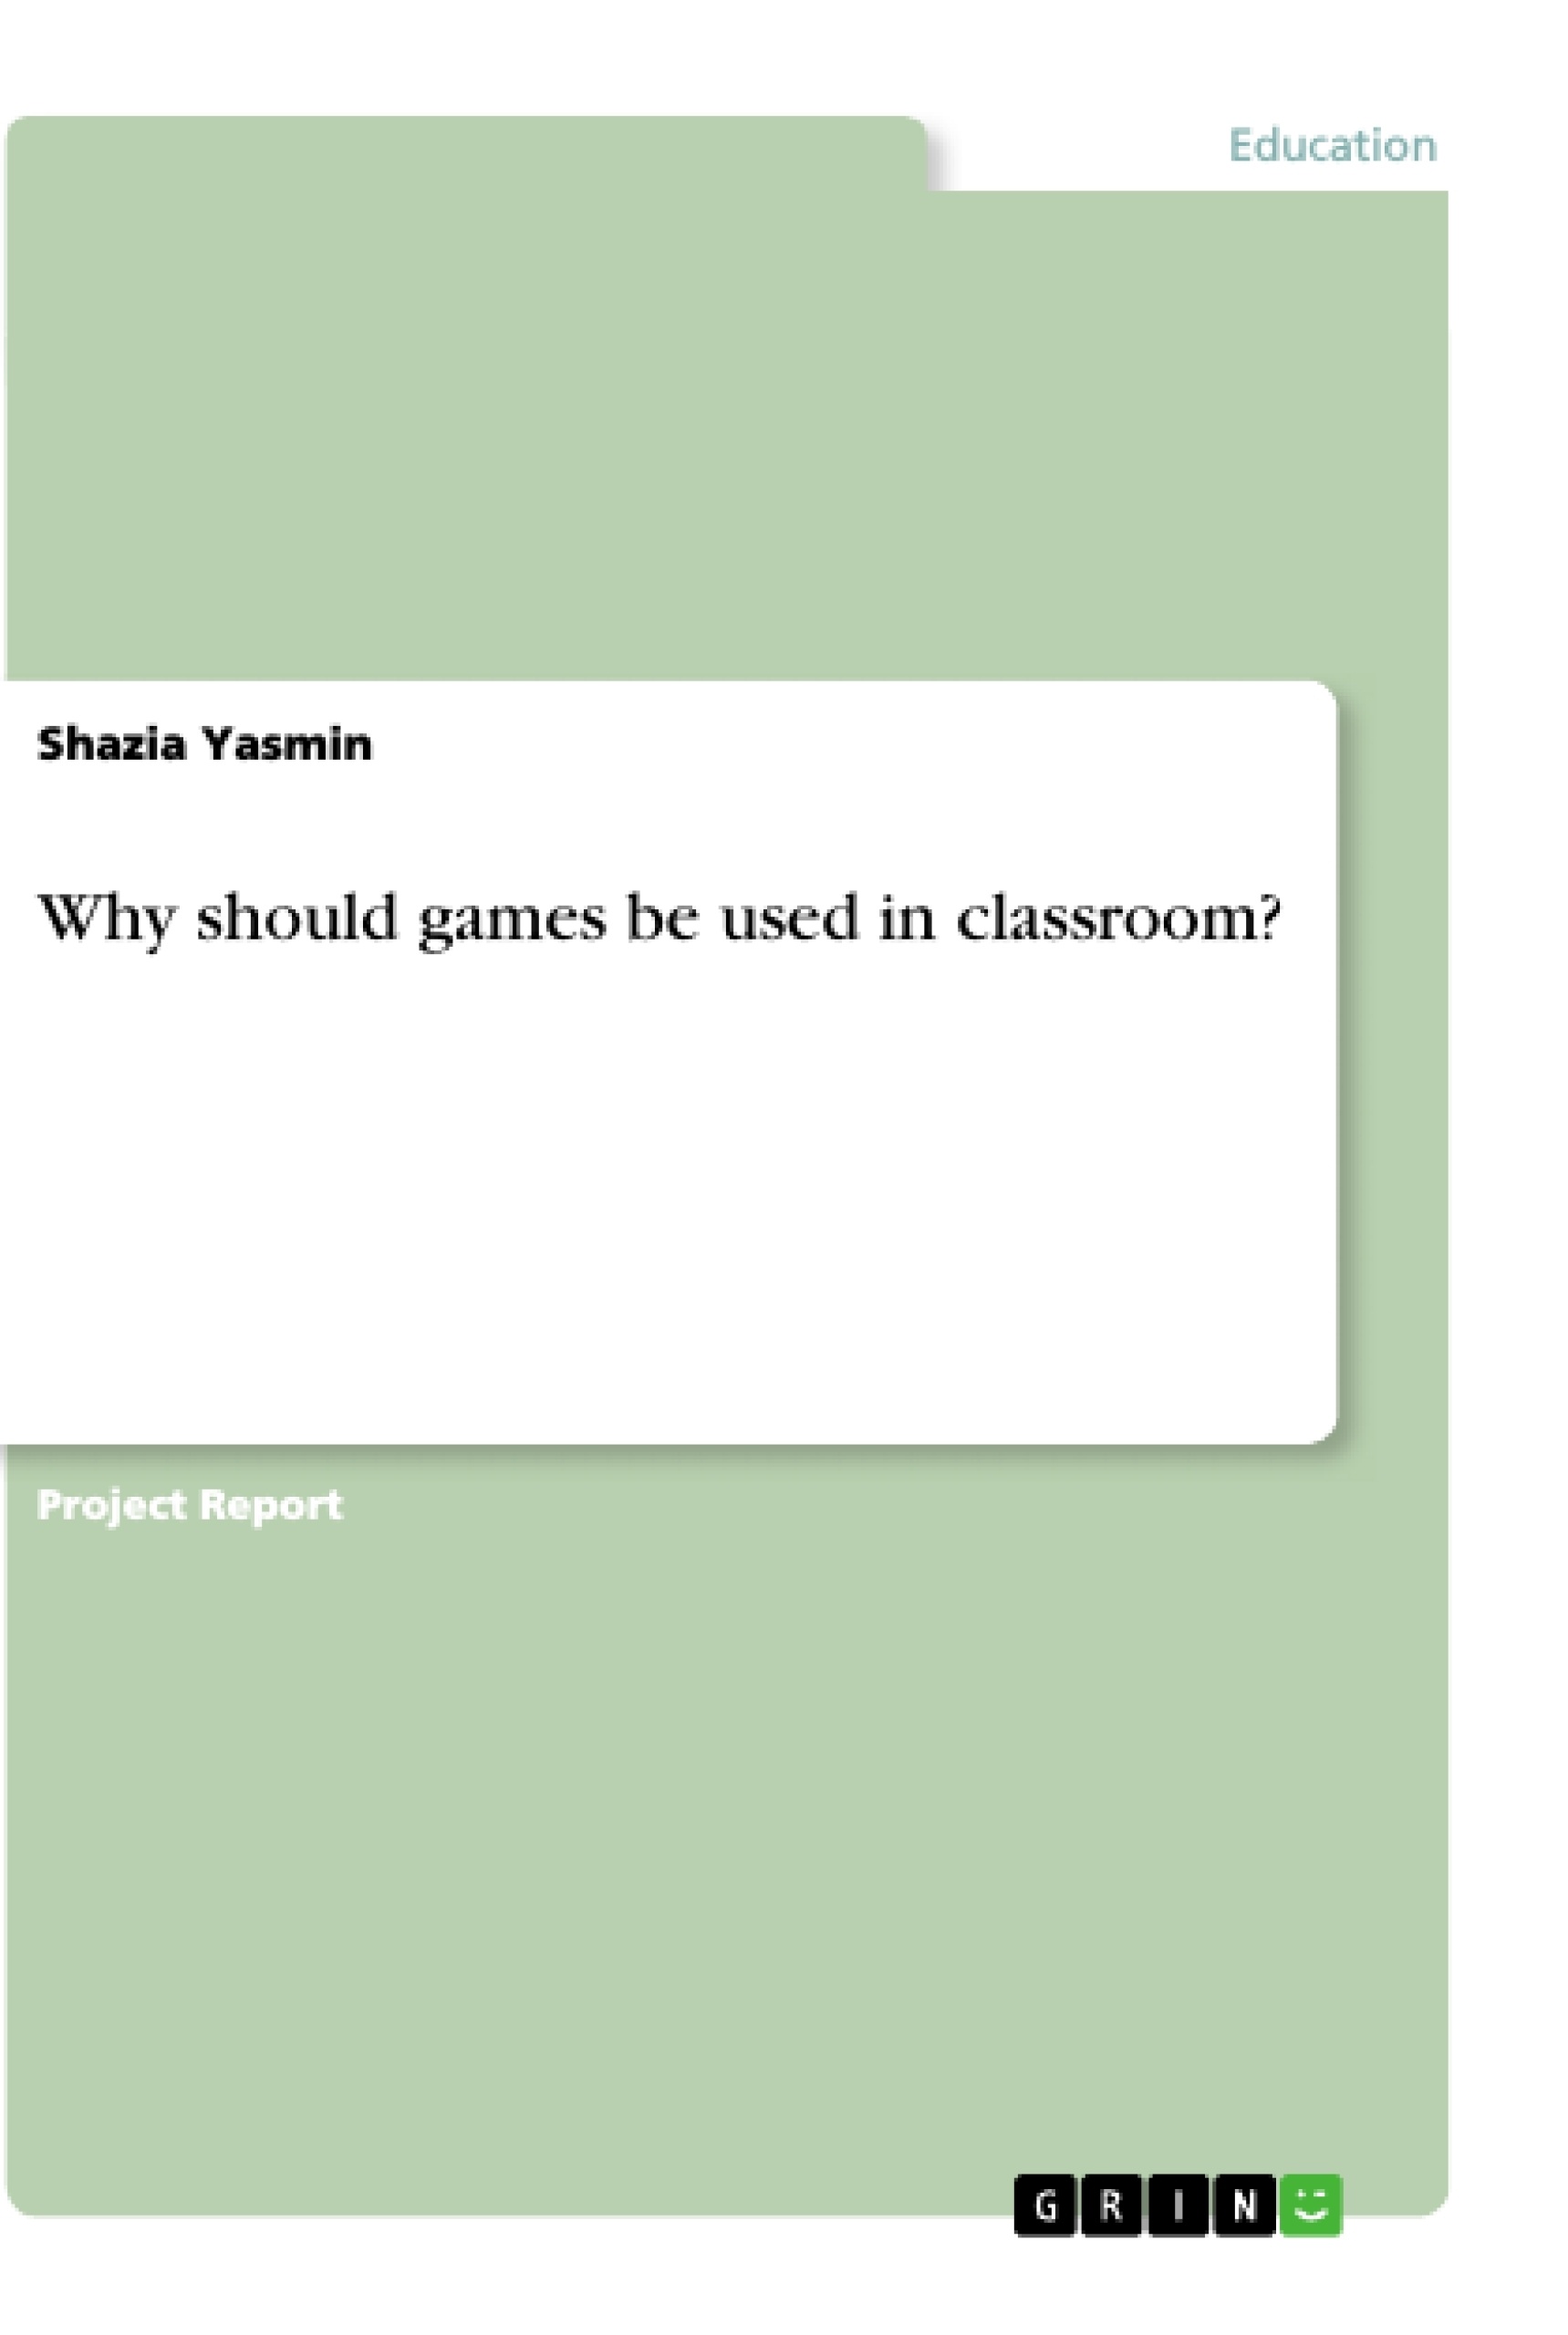 Título: Why should games be used in classroom?